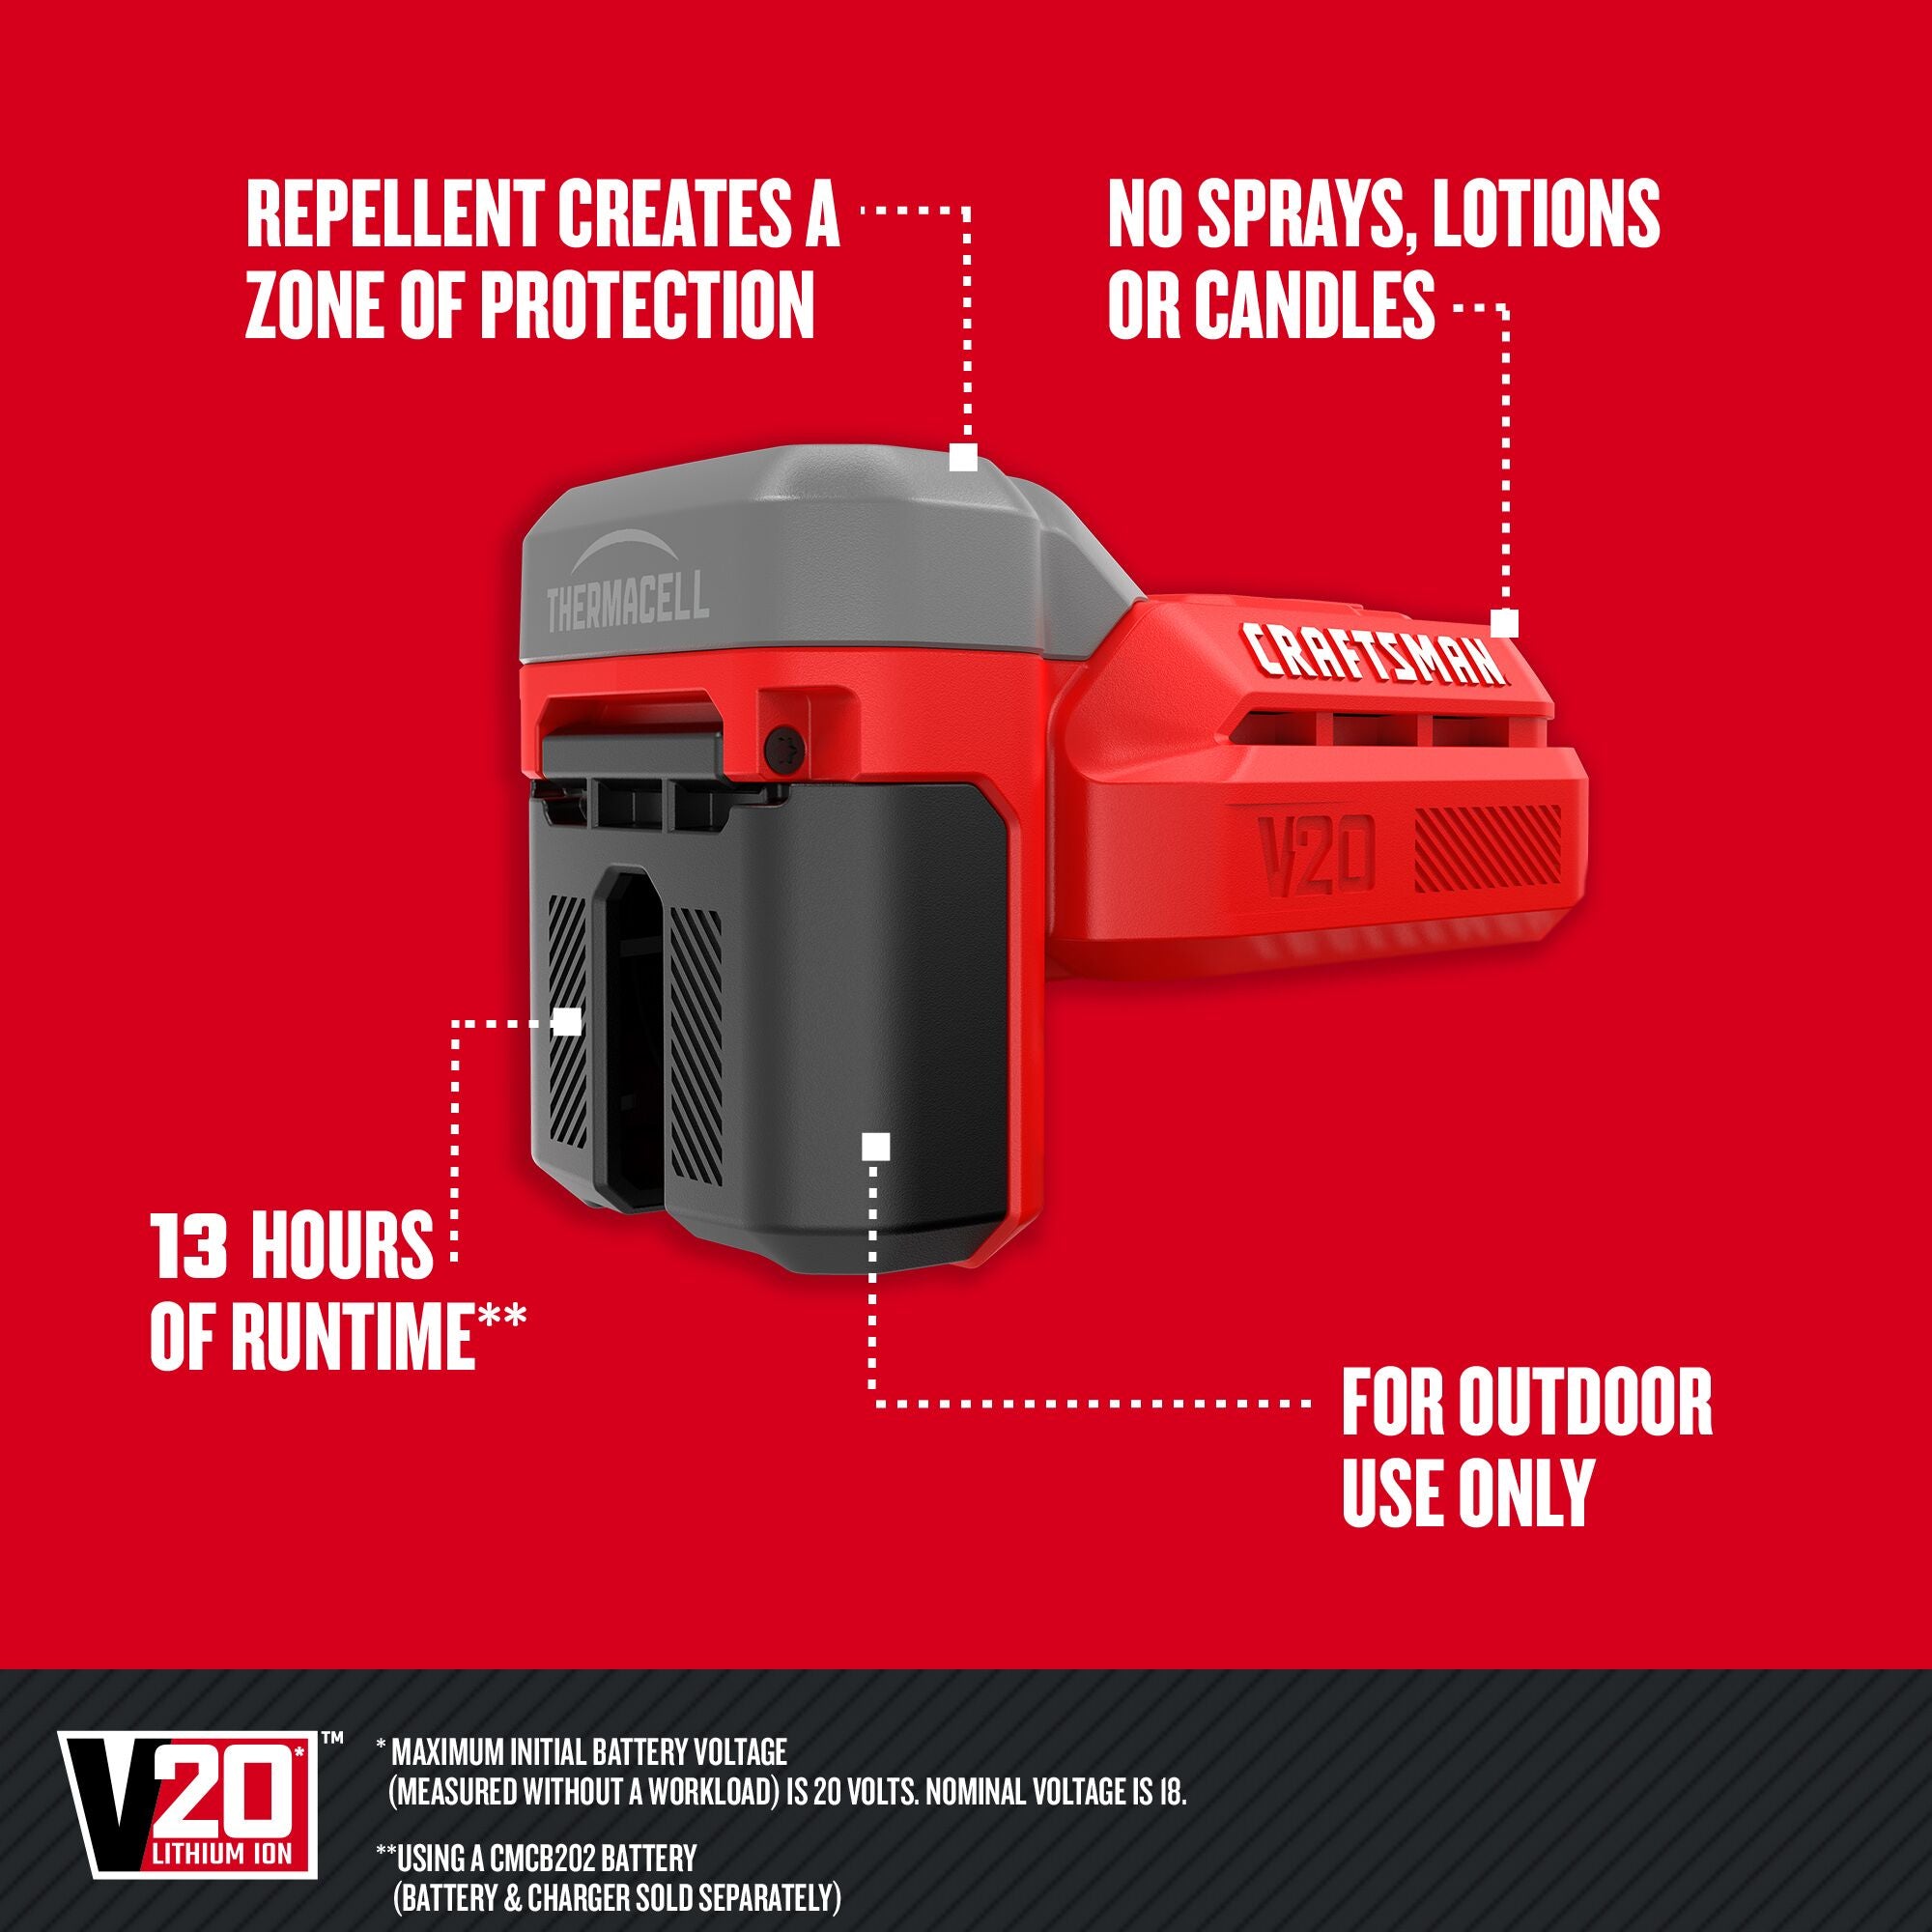 CRAFTSMAN V20 Mosquito Repellent 2 pack info graphic